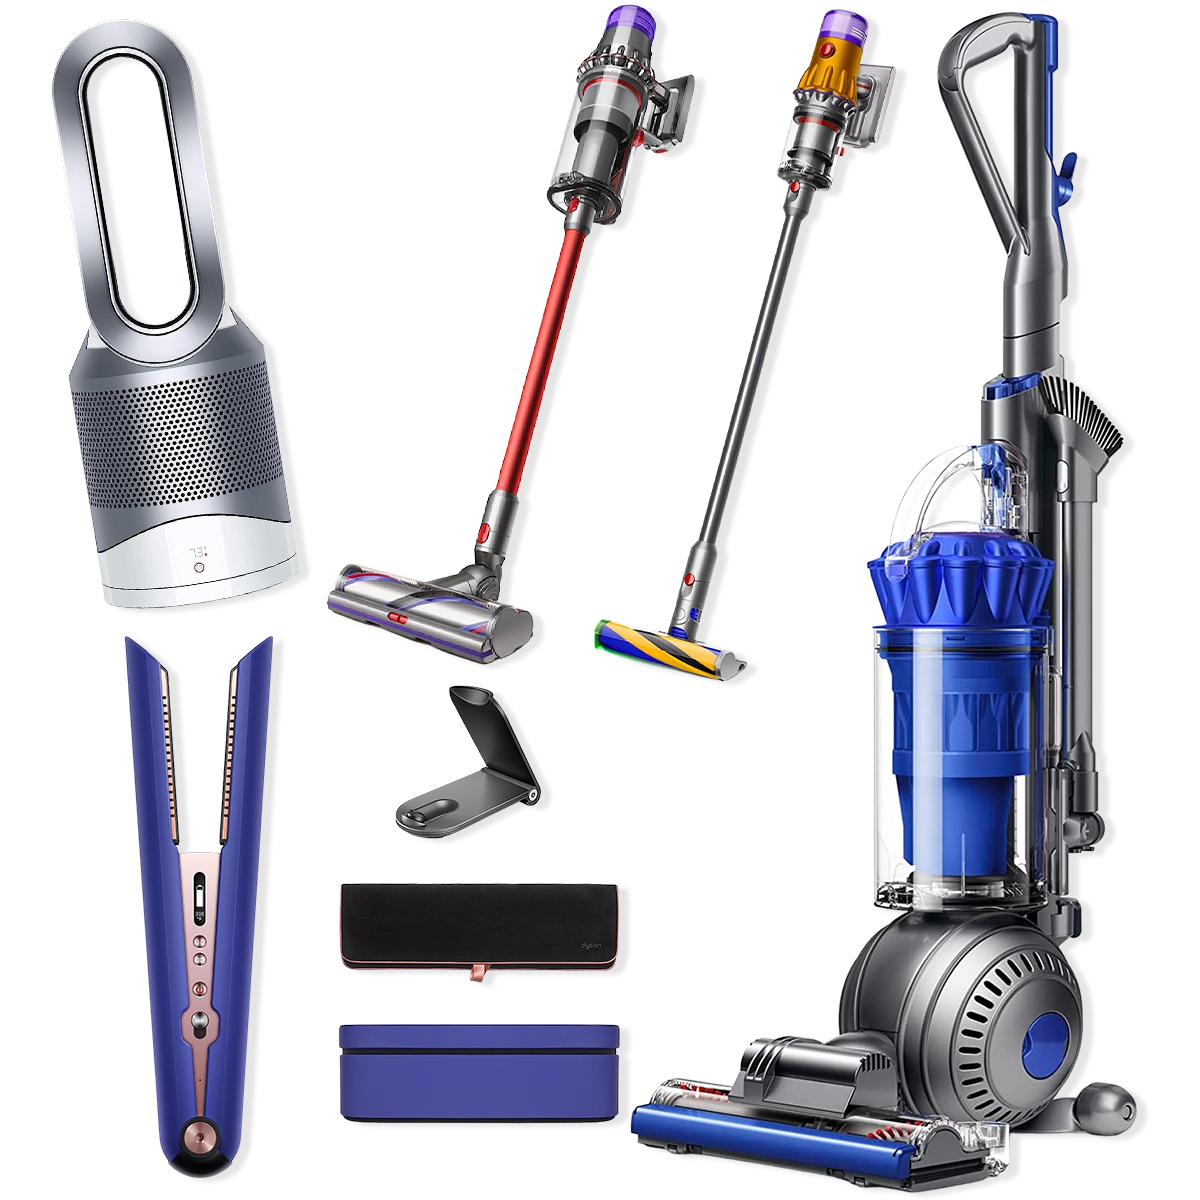 Save $250 on Dyson Hair Tools, Vacuums, and Air Purifiers on Prime Day